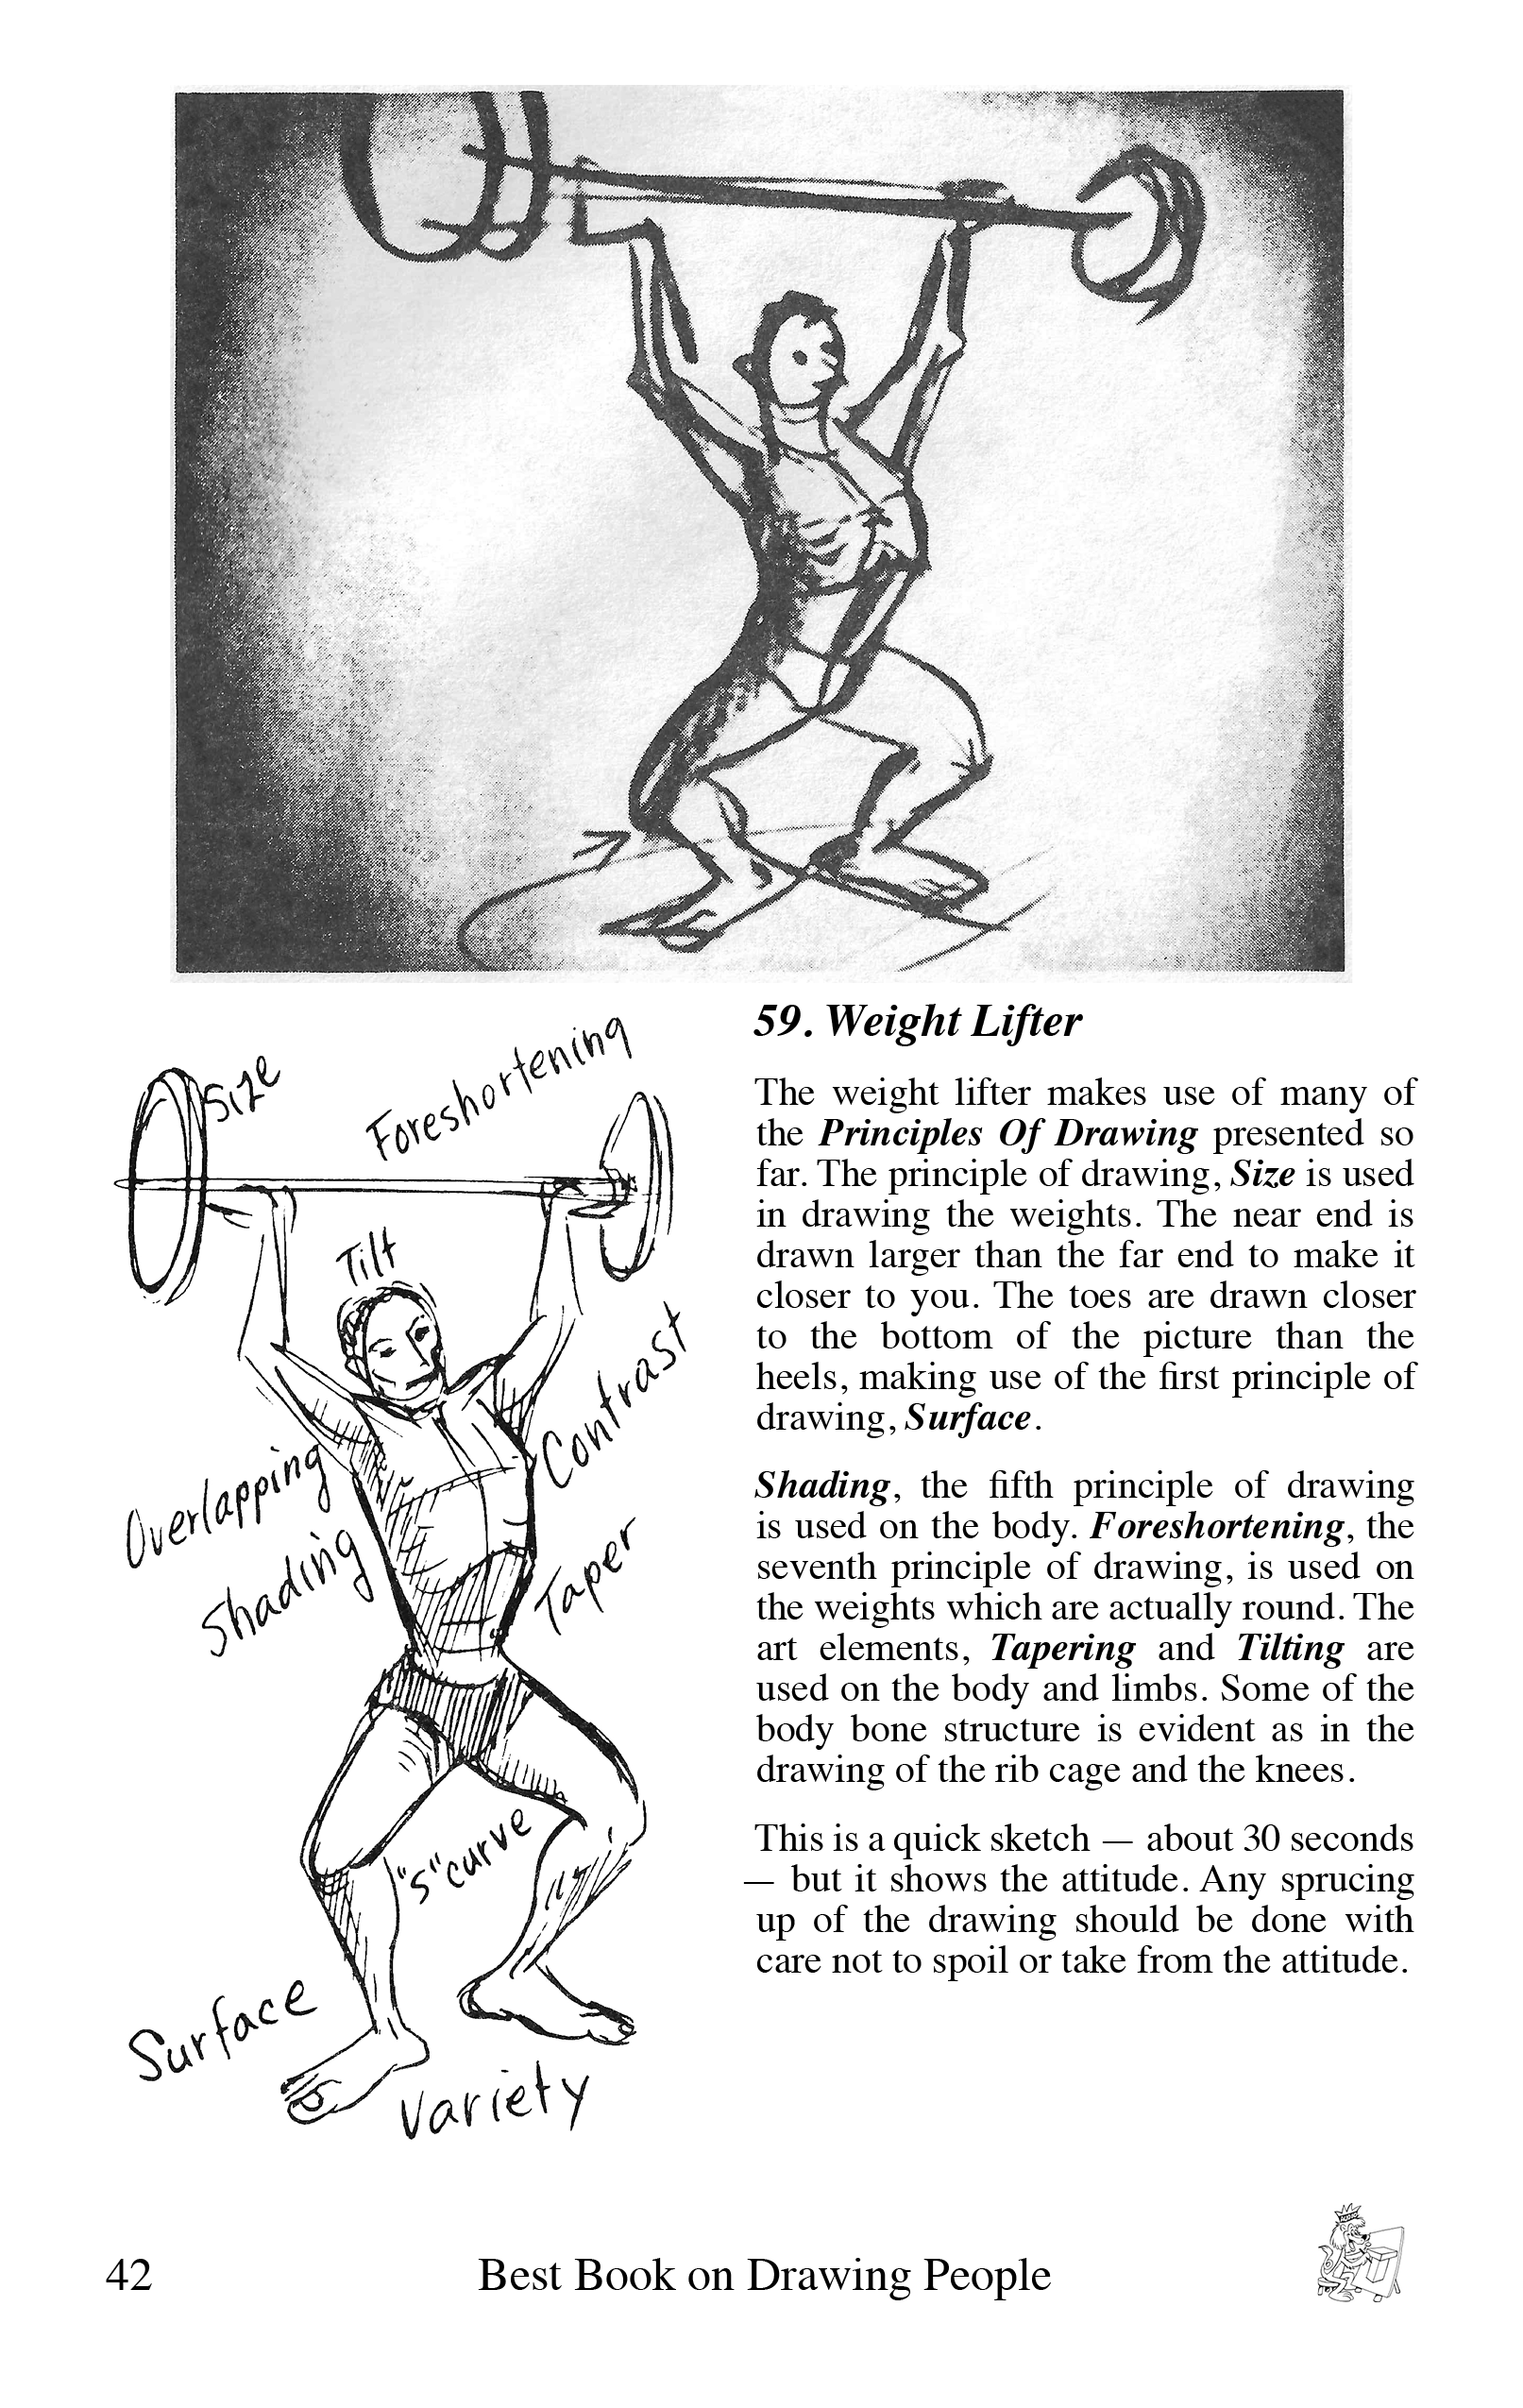 Weight Lifter sample page from the book Best Book on Drawing People by Bruce McIntyre